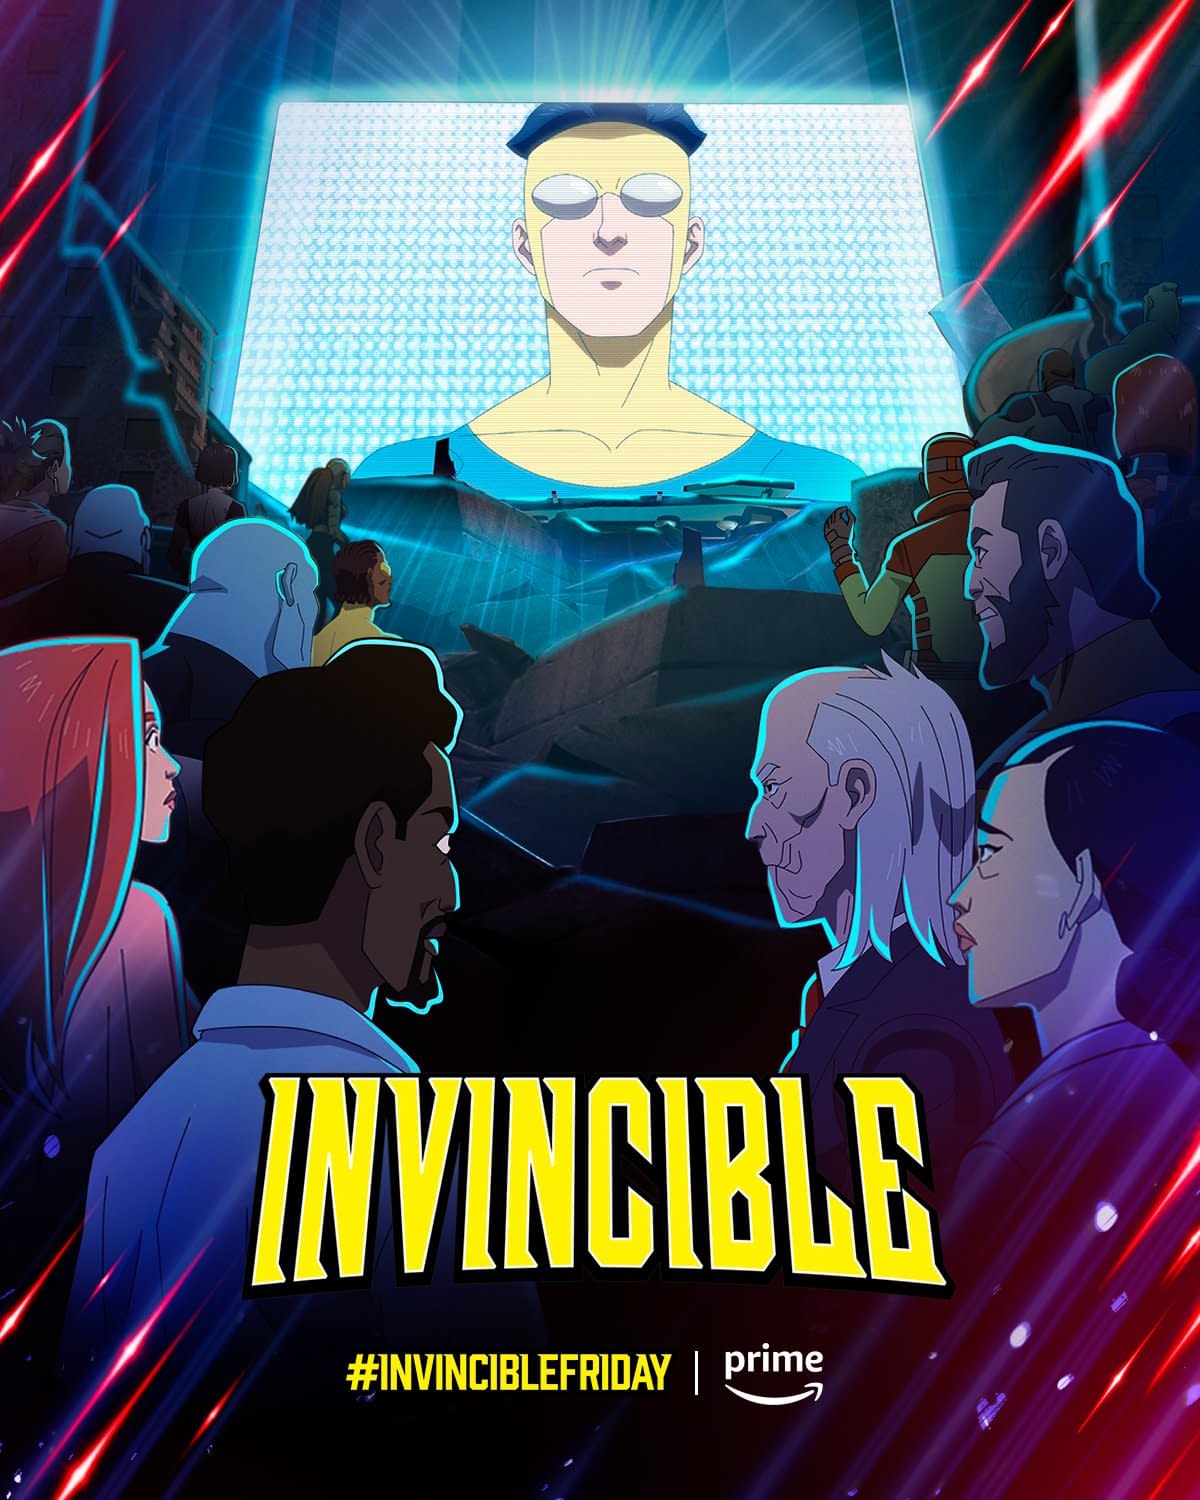 Invincible Season 2 Key Art Hopefully Not a Sign of Things To Come